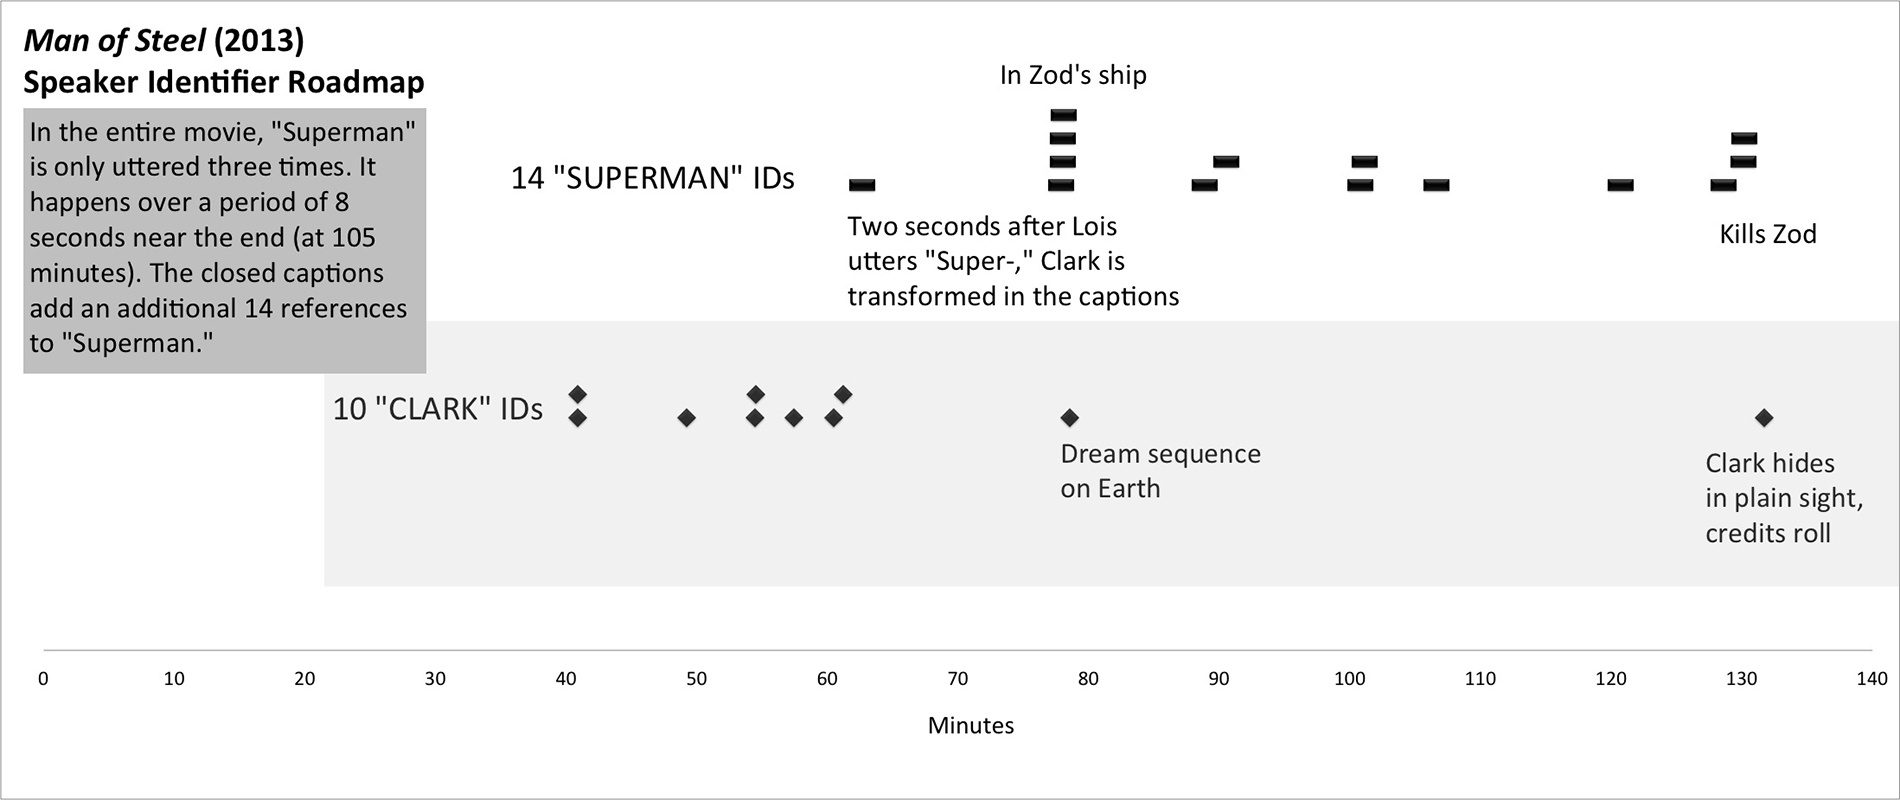 A timeline showing the occurrence of every speaker identifier with CLARK and SUPERMAN.